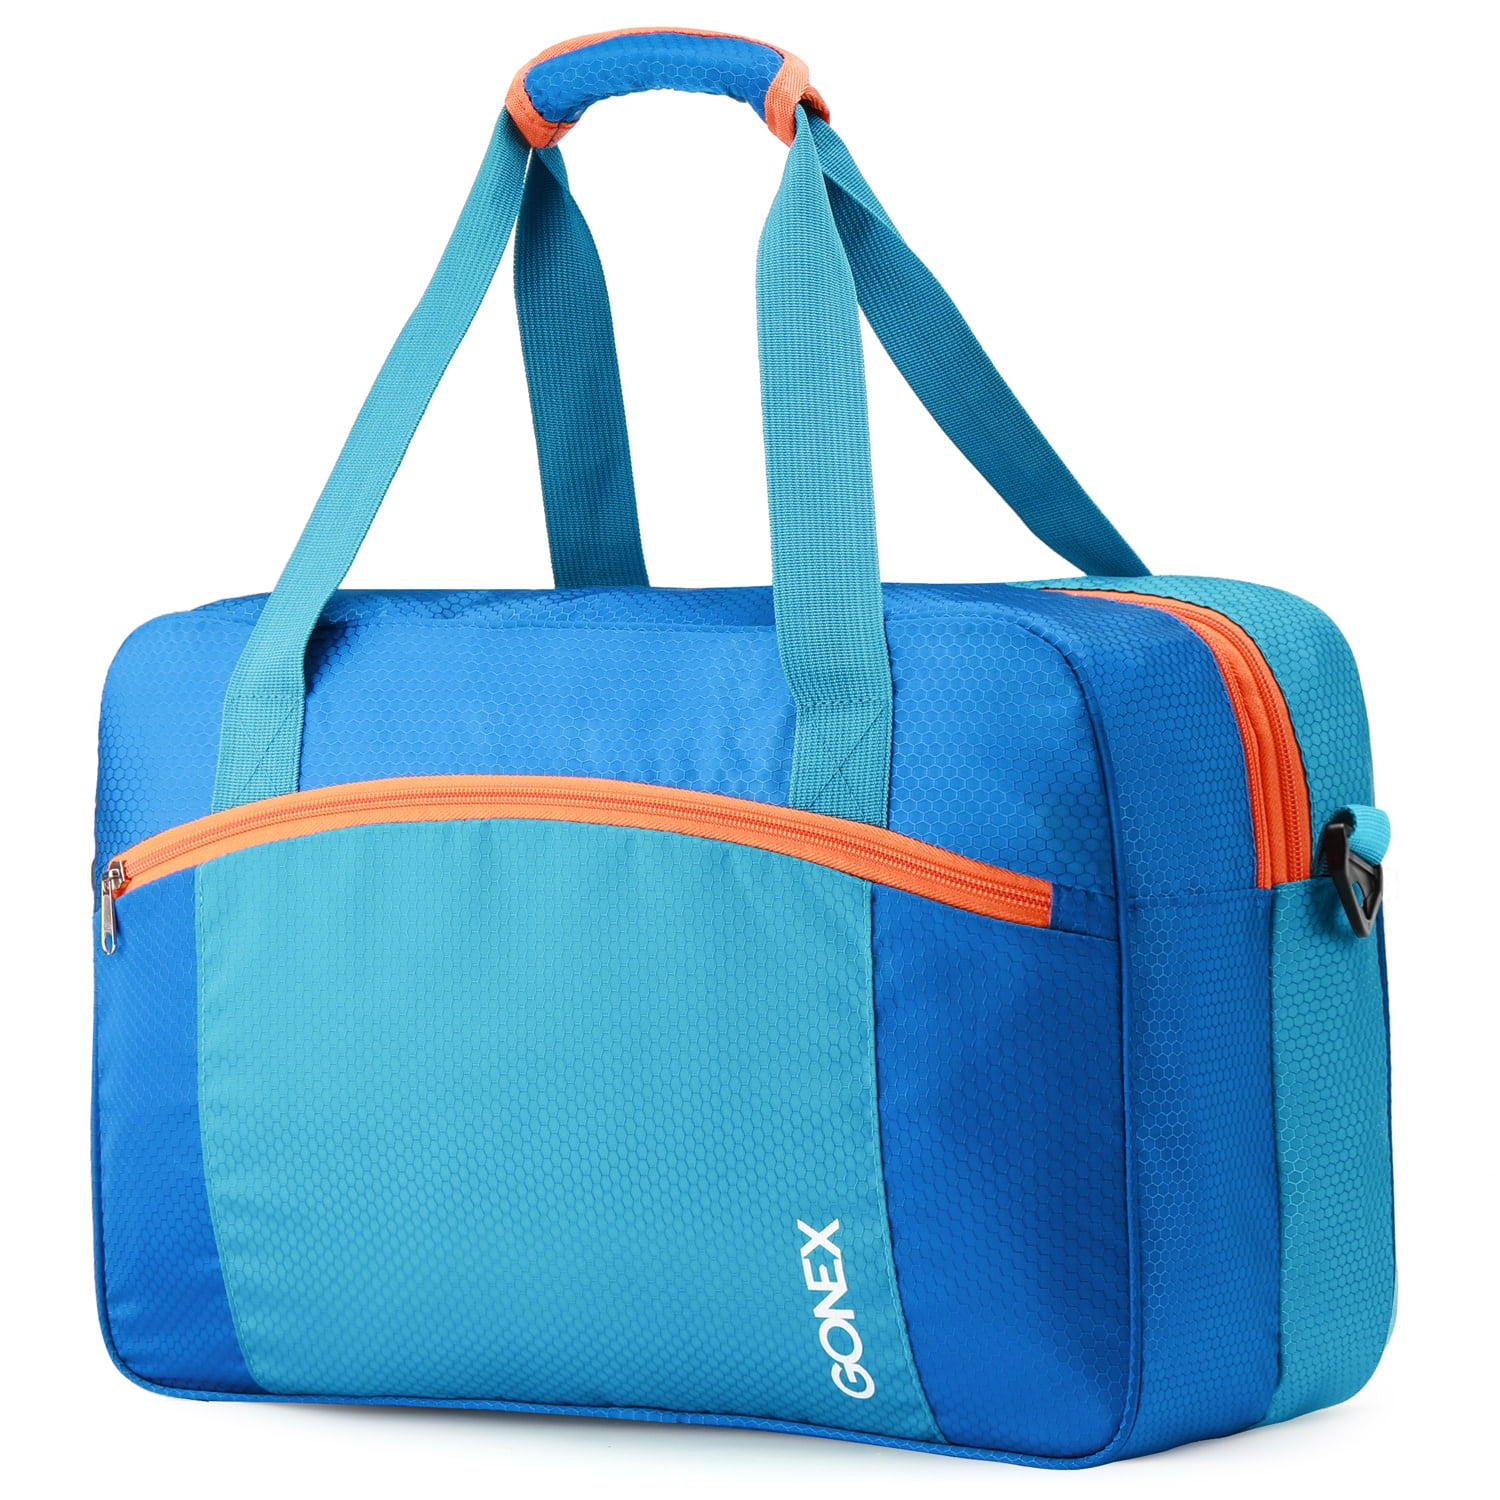 ts-store Swim Bag Waterproof Sports Bag Beach Wet Dry Gym Tote Pool Swimming Sports Fitness Running Fishing Camp Outdoor